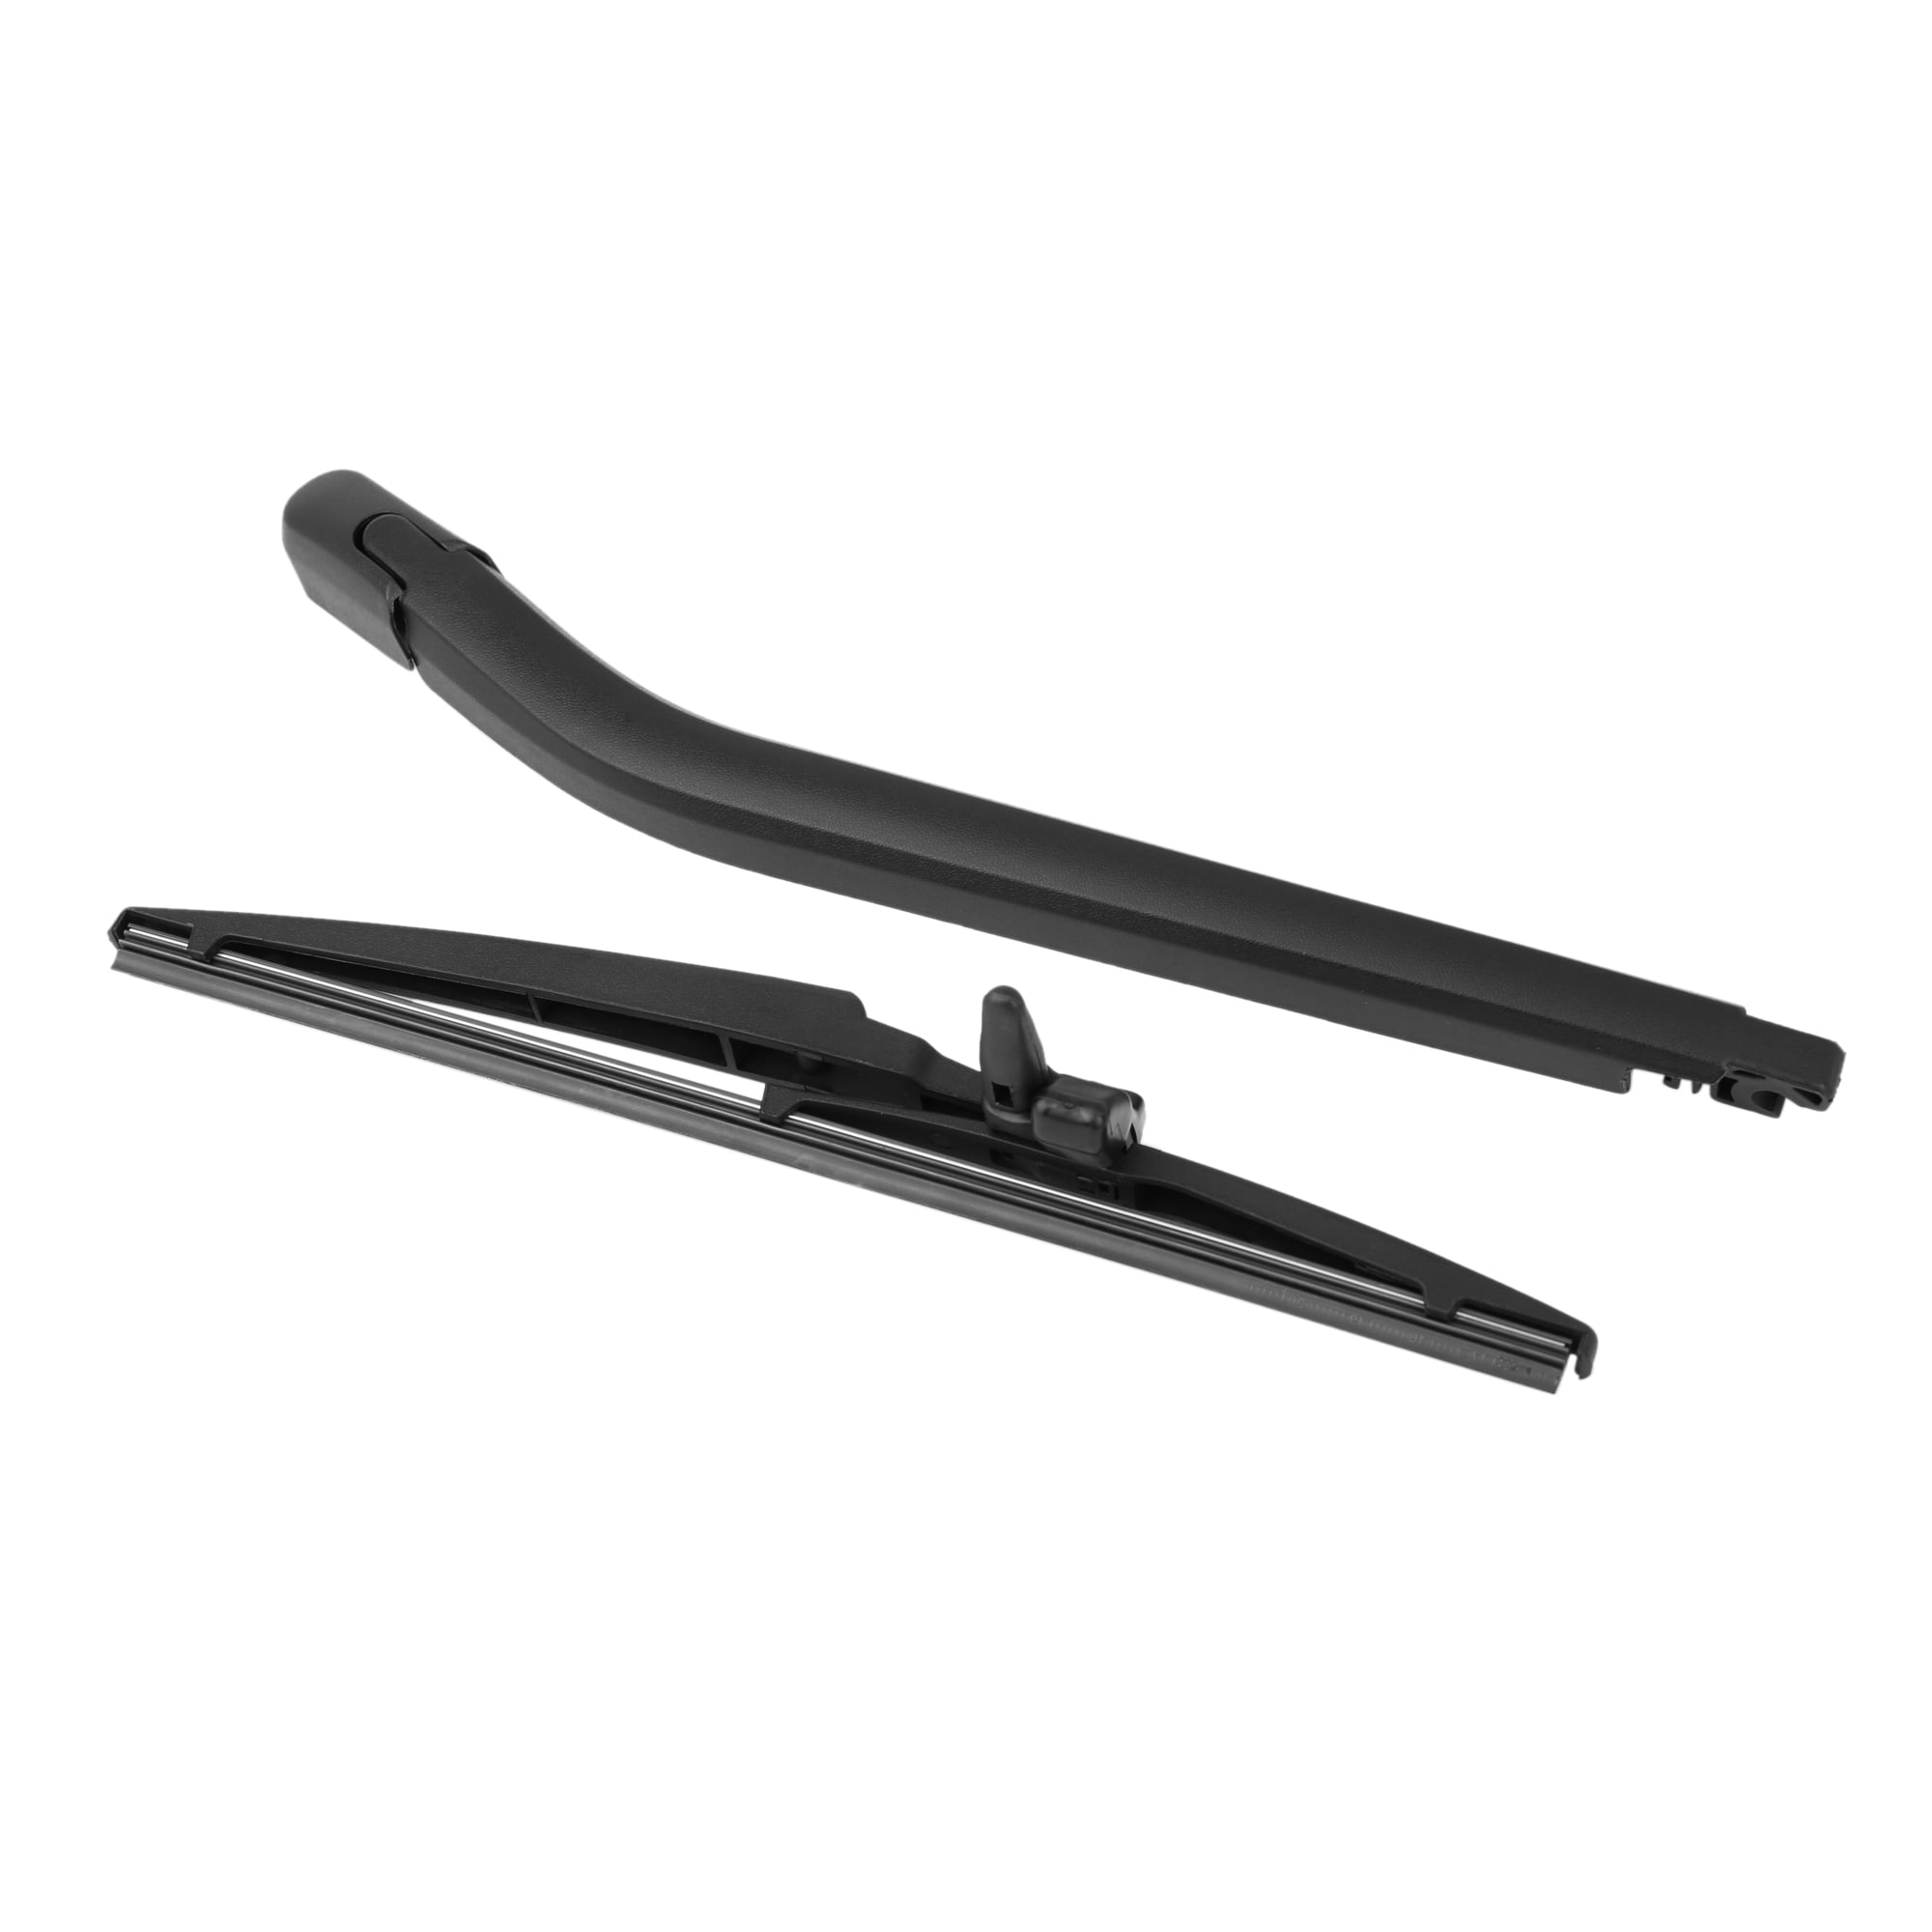 OTUAYAUTO Factory OEM 85241-35060 Rear Windshield Wiper Arm Blade Set Replacement for Toyota 4Runner 2010-2015